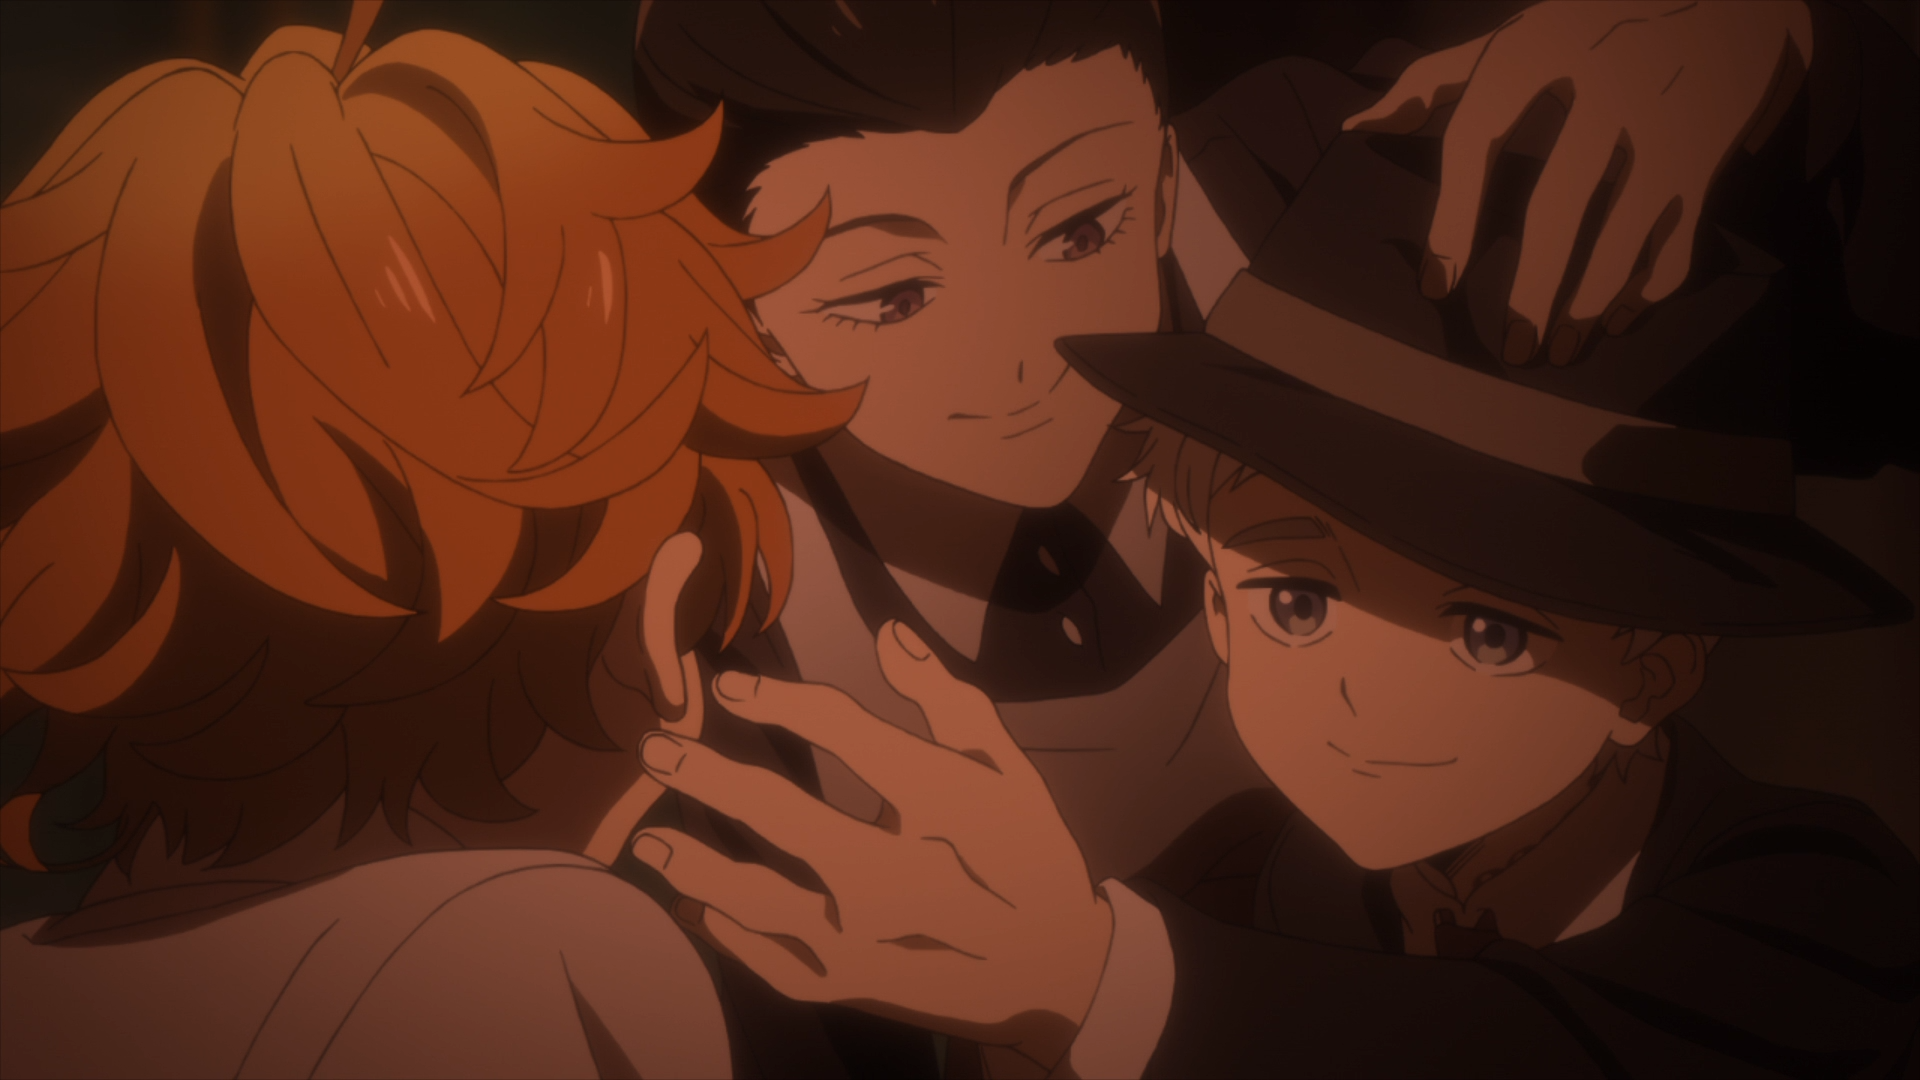 Isabella interrupts Norman's confession to Emma in The Promised Neverland.